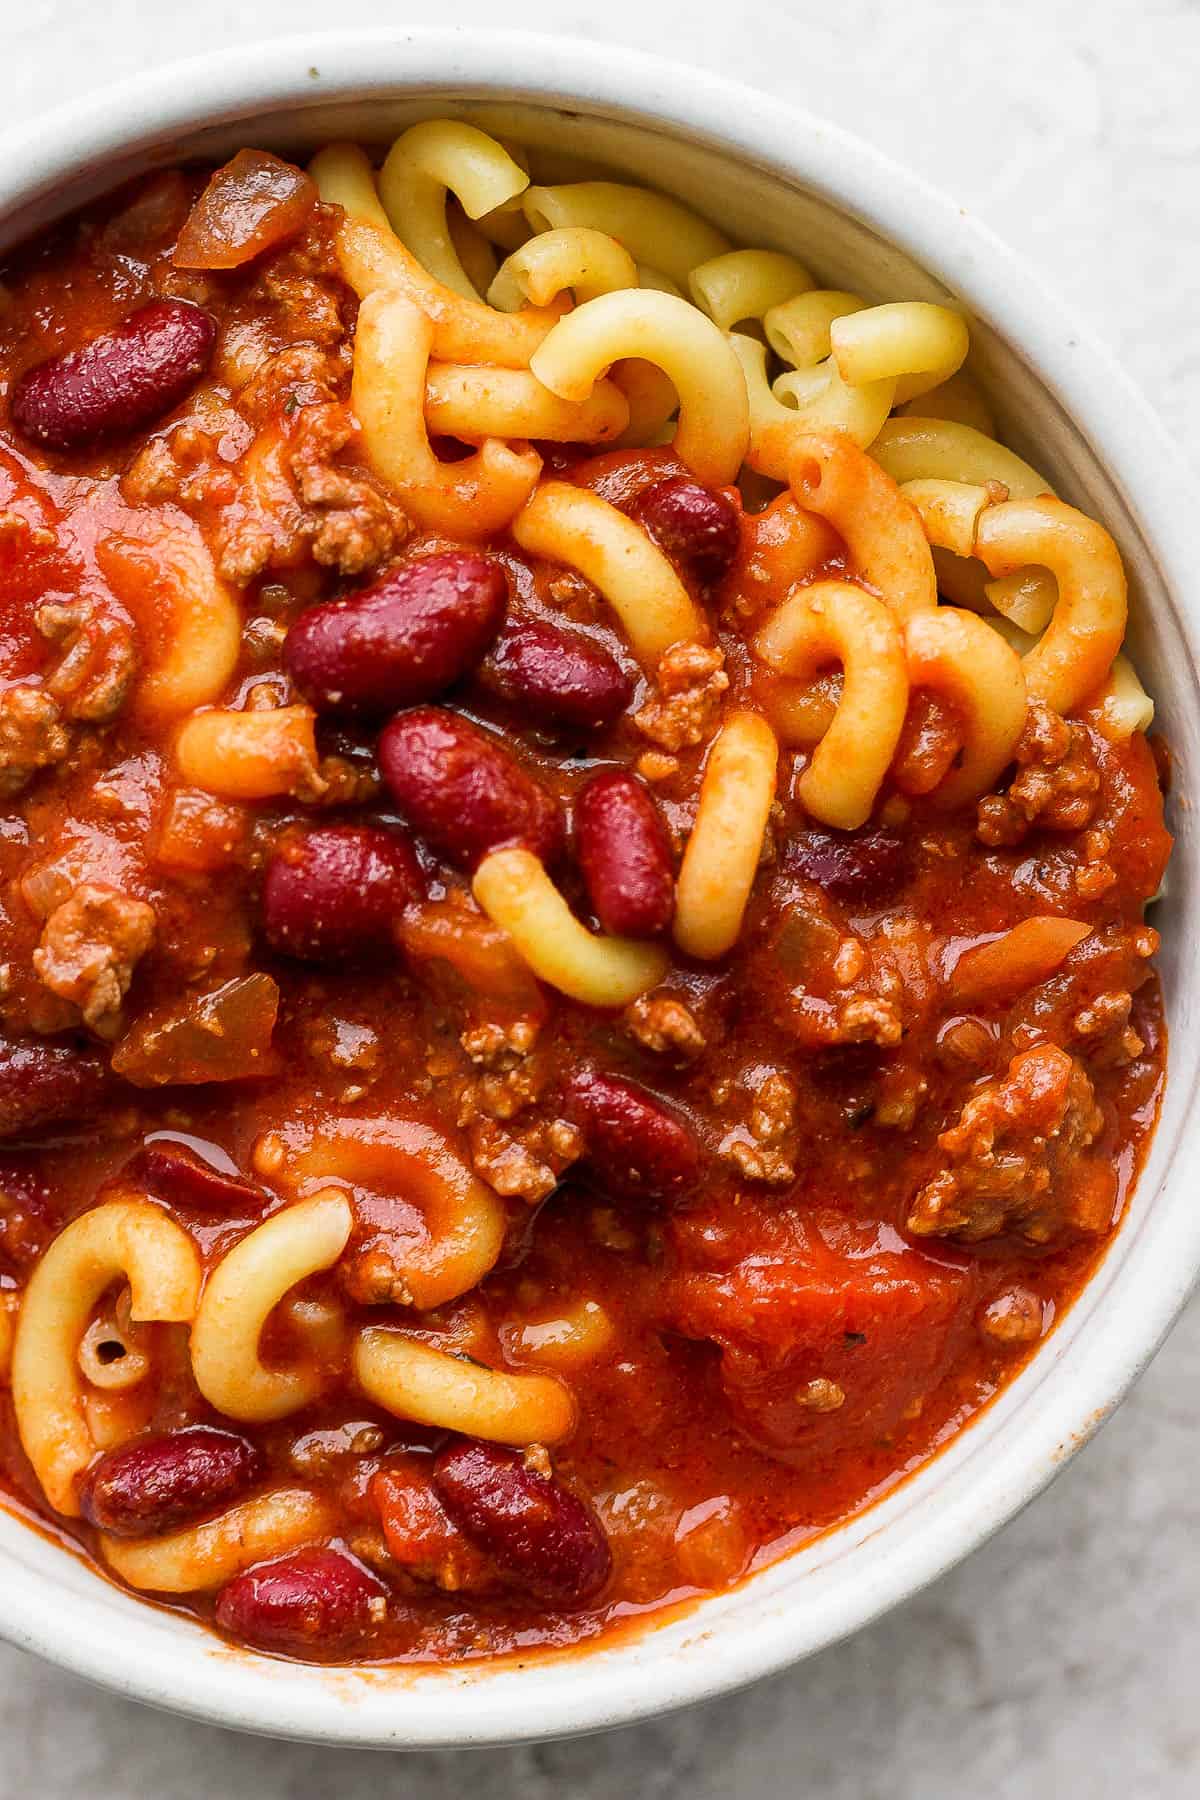 Goulash in a serving bowl with macaroni noodles.